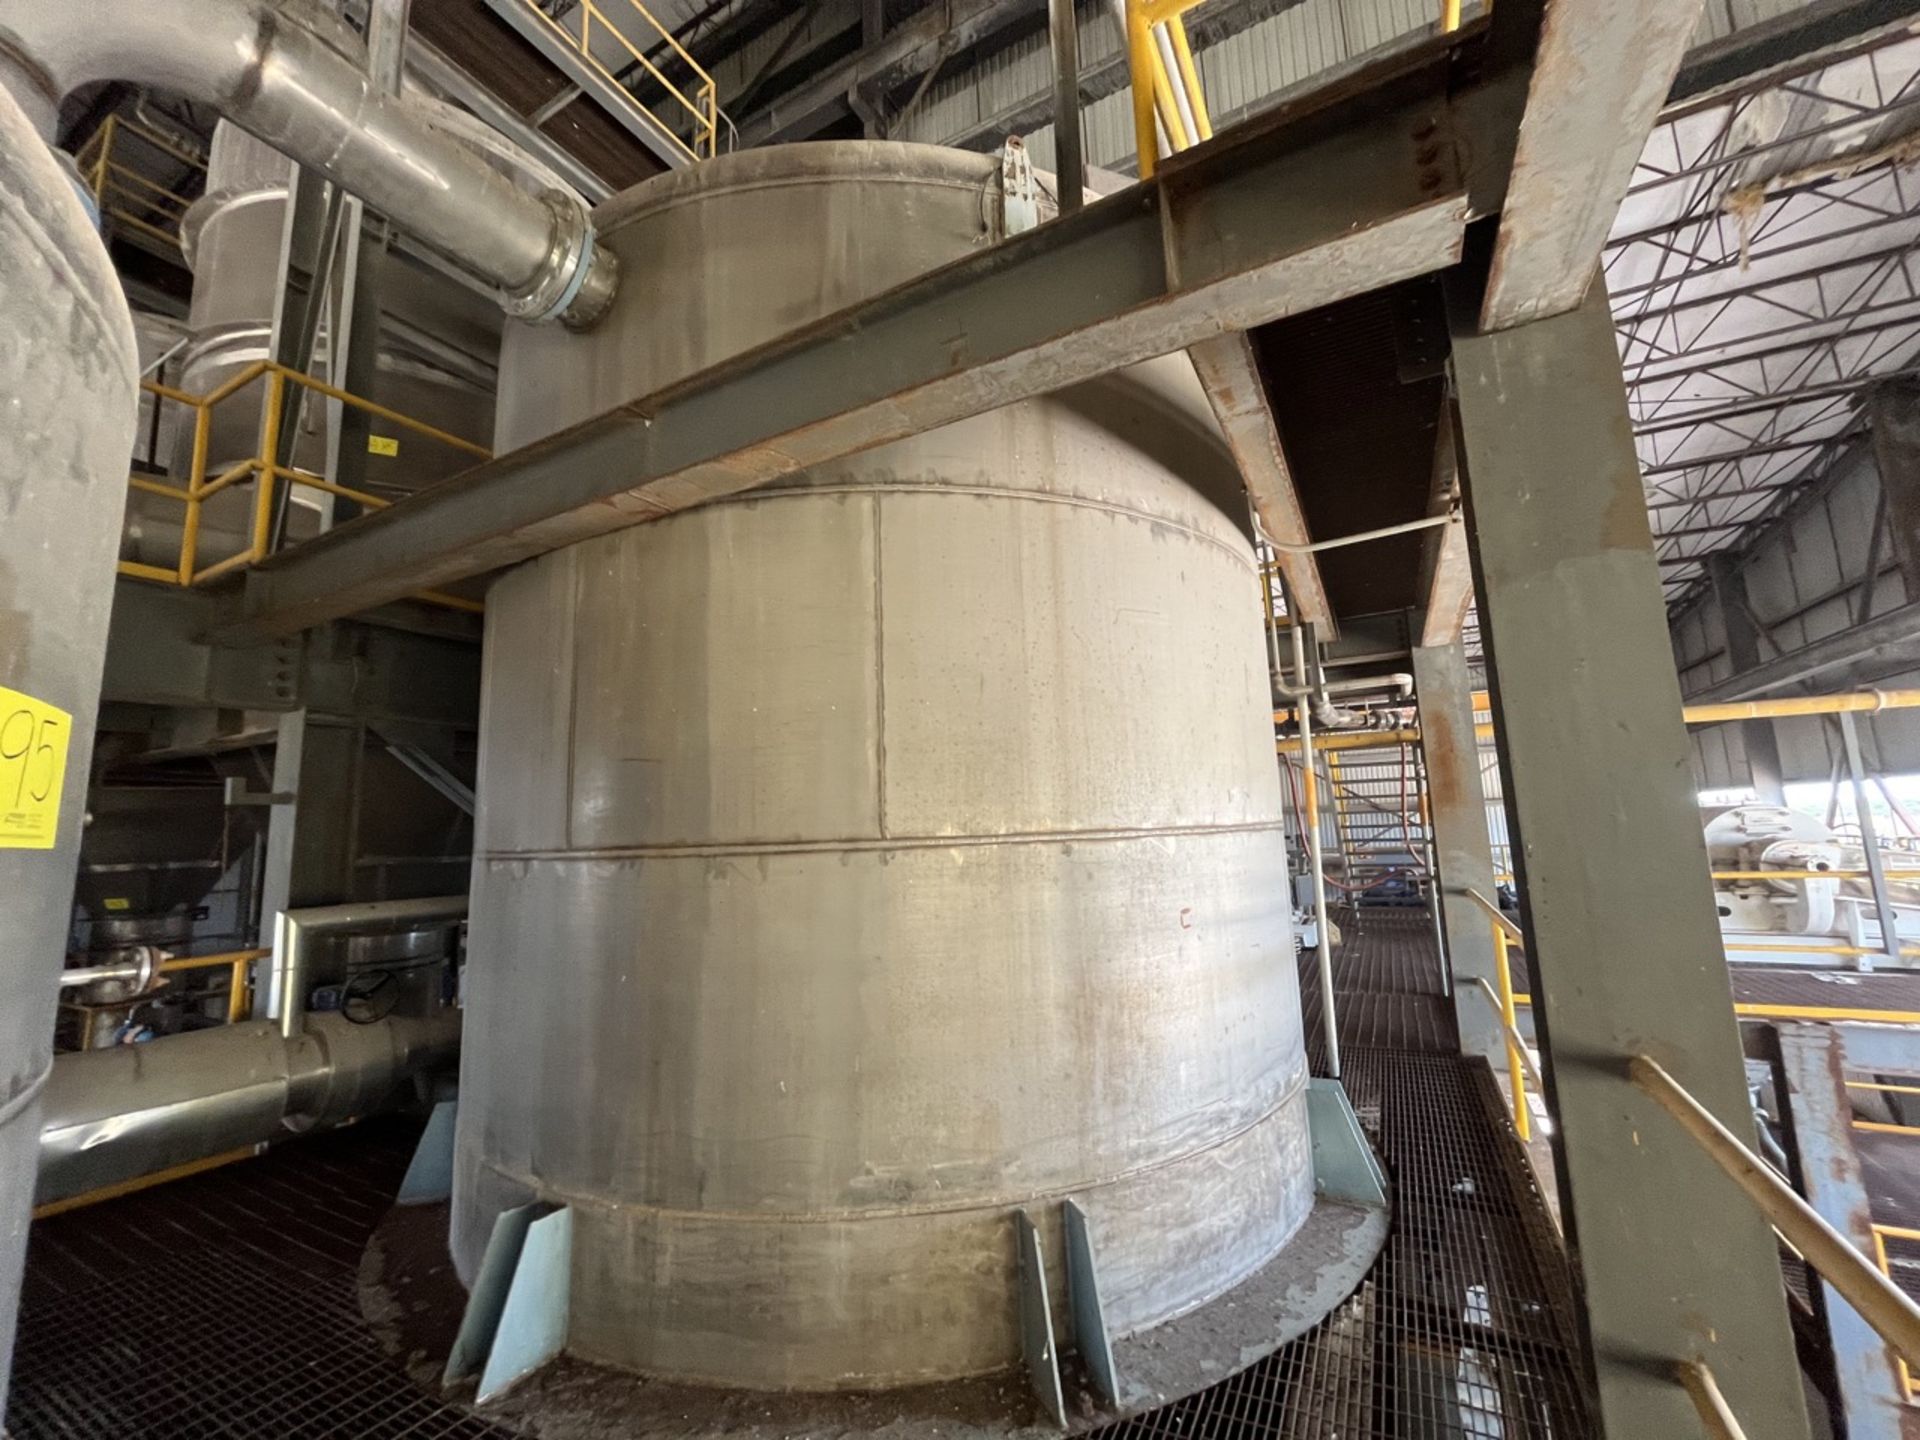 Conical storage tank with stainless steel toriesferica lid measures approximately 4.30 meters in di - Bild 22 aus 37